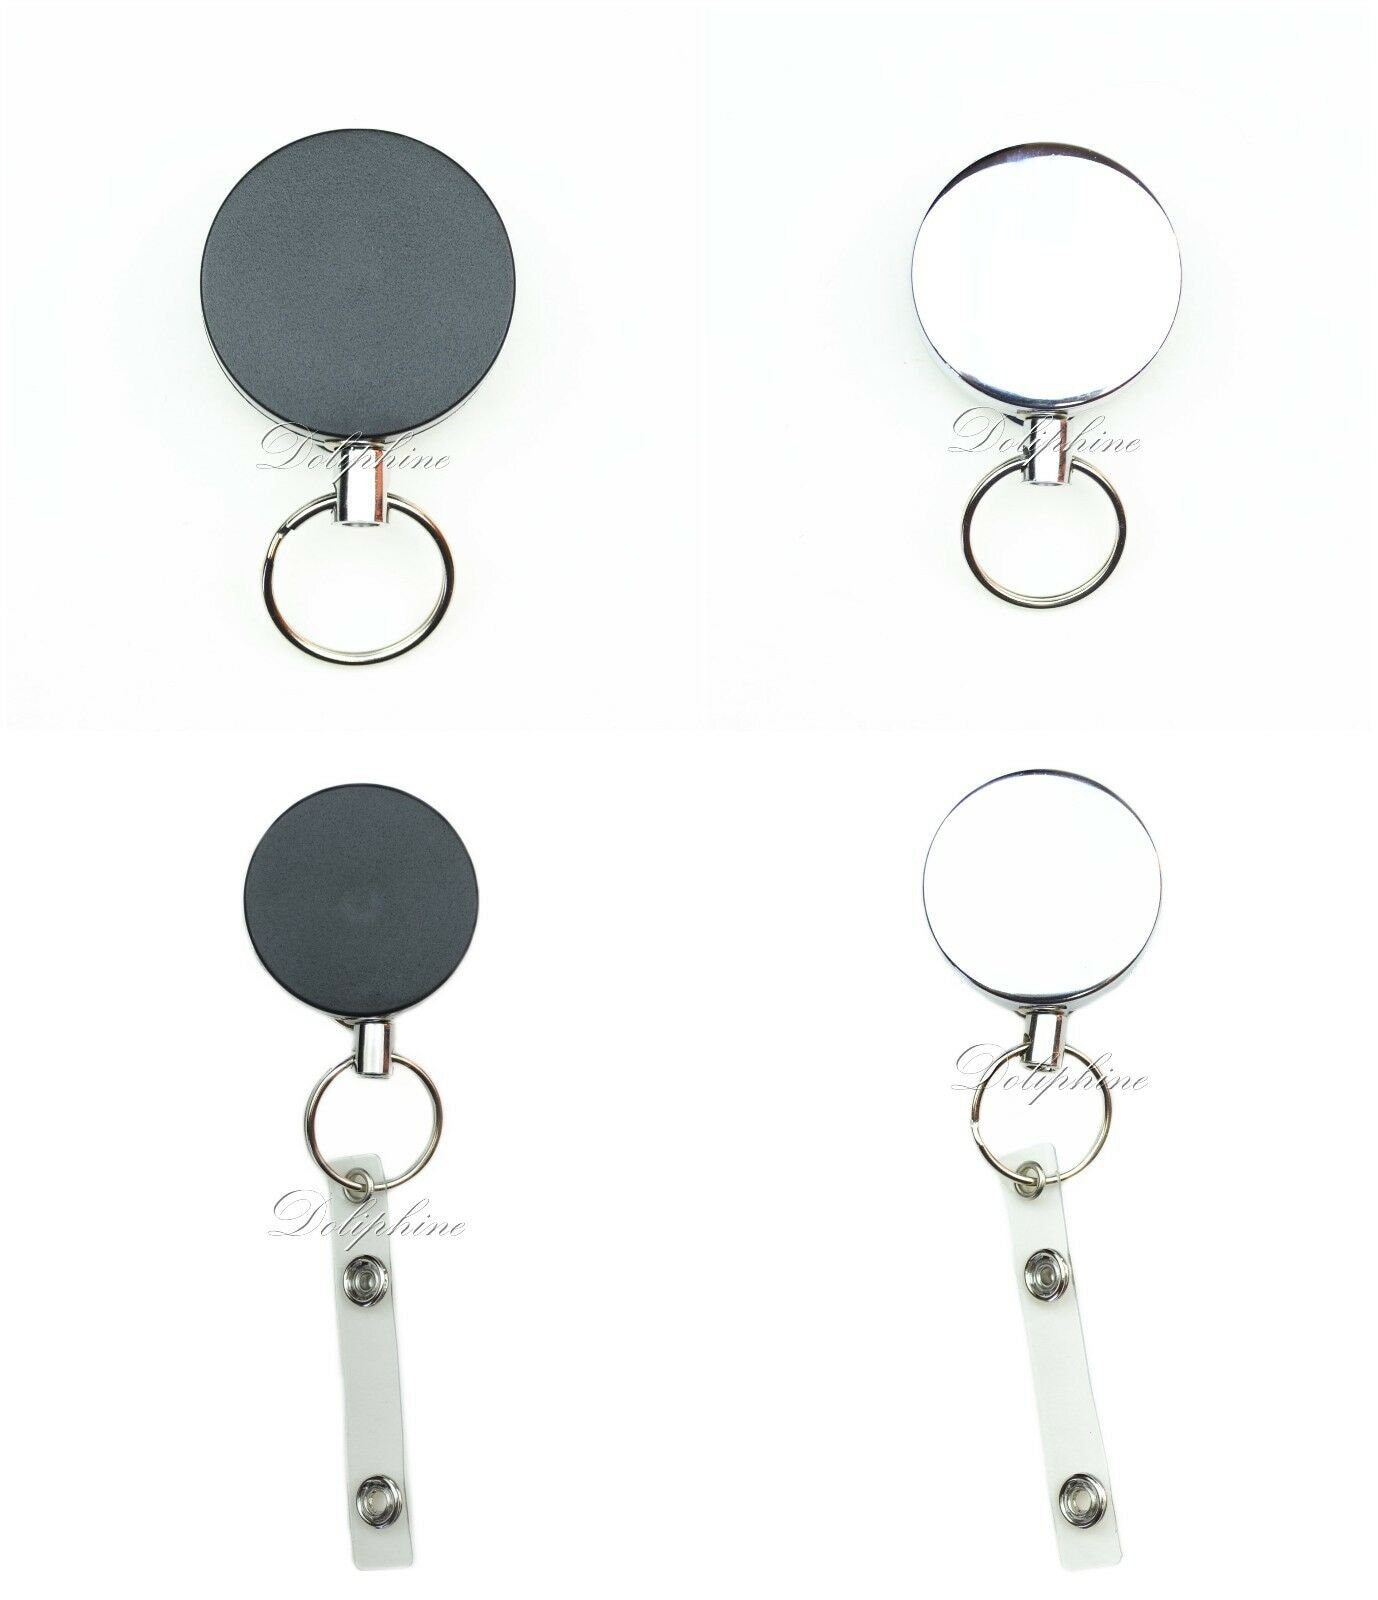 Heavy Duty 1.5 inch Diameter Metal Retractable Badge Reel Holder with Steel Cord Belt Clip and Key Ring (Silver, Black)